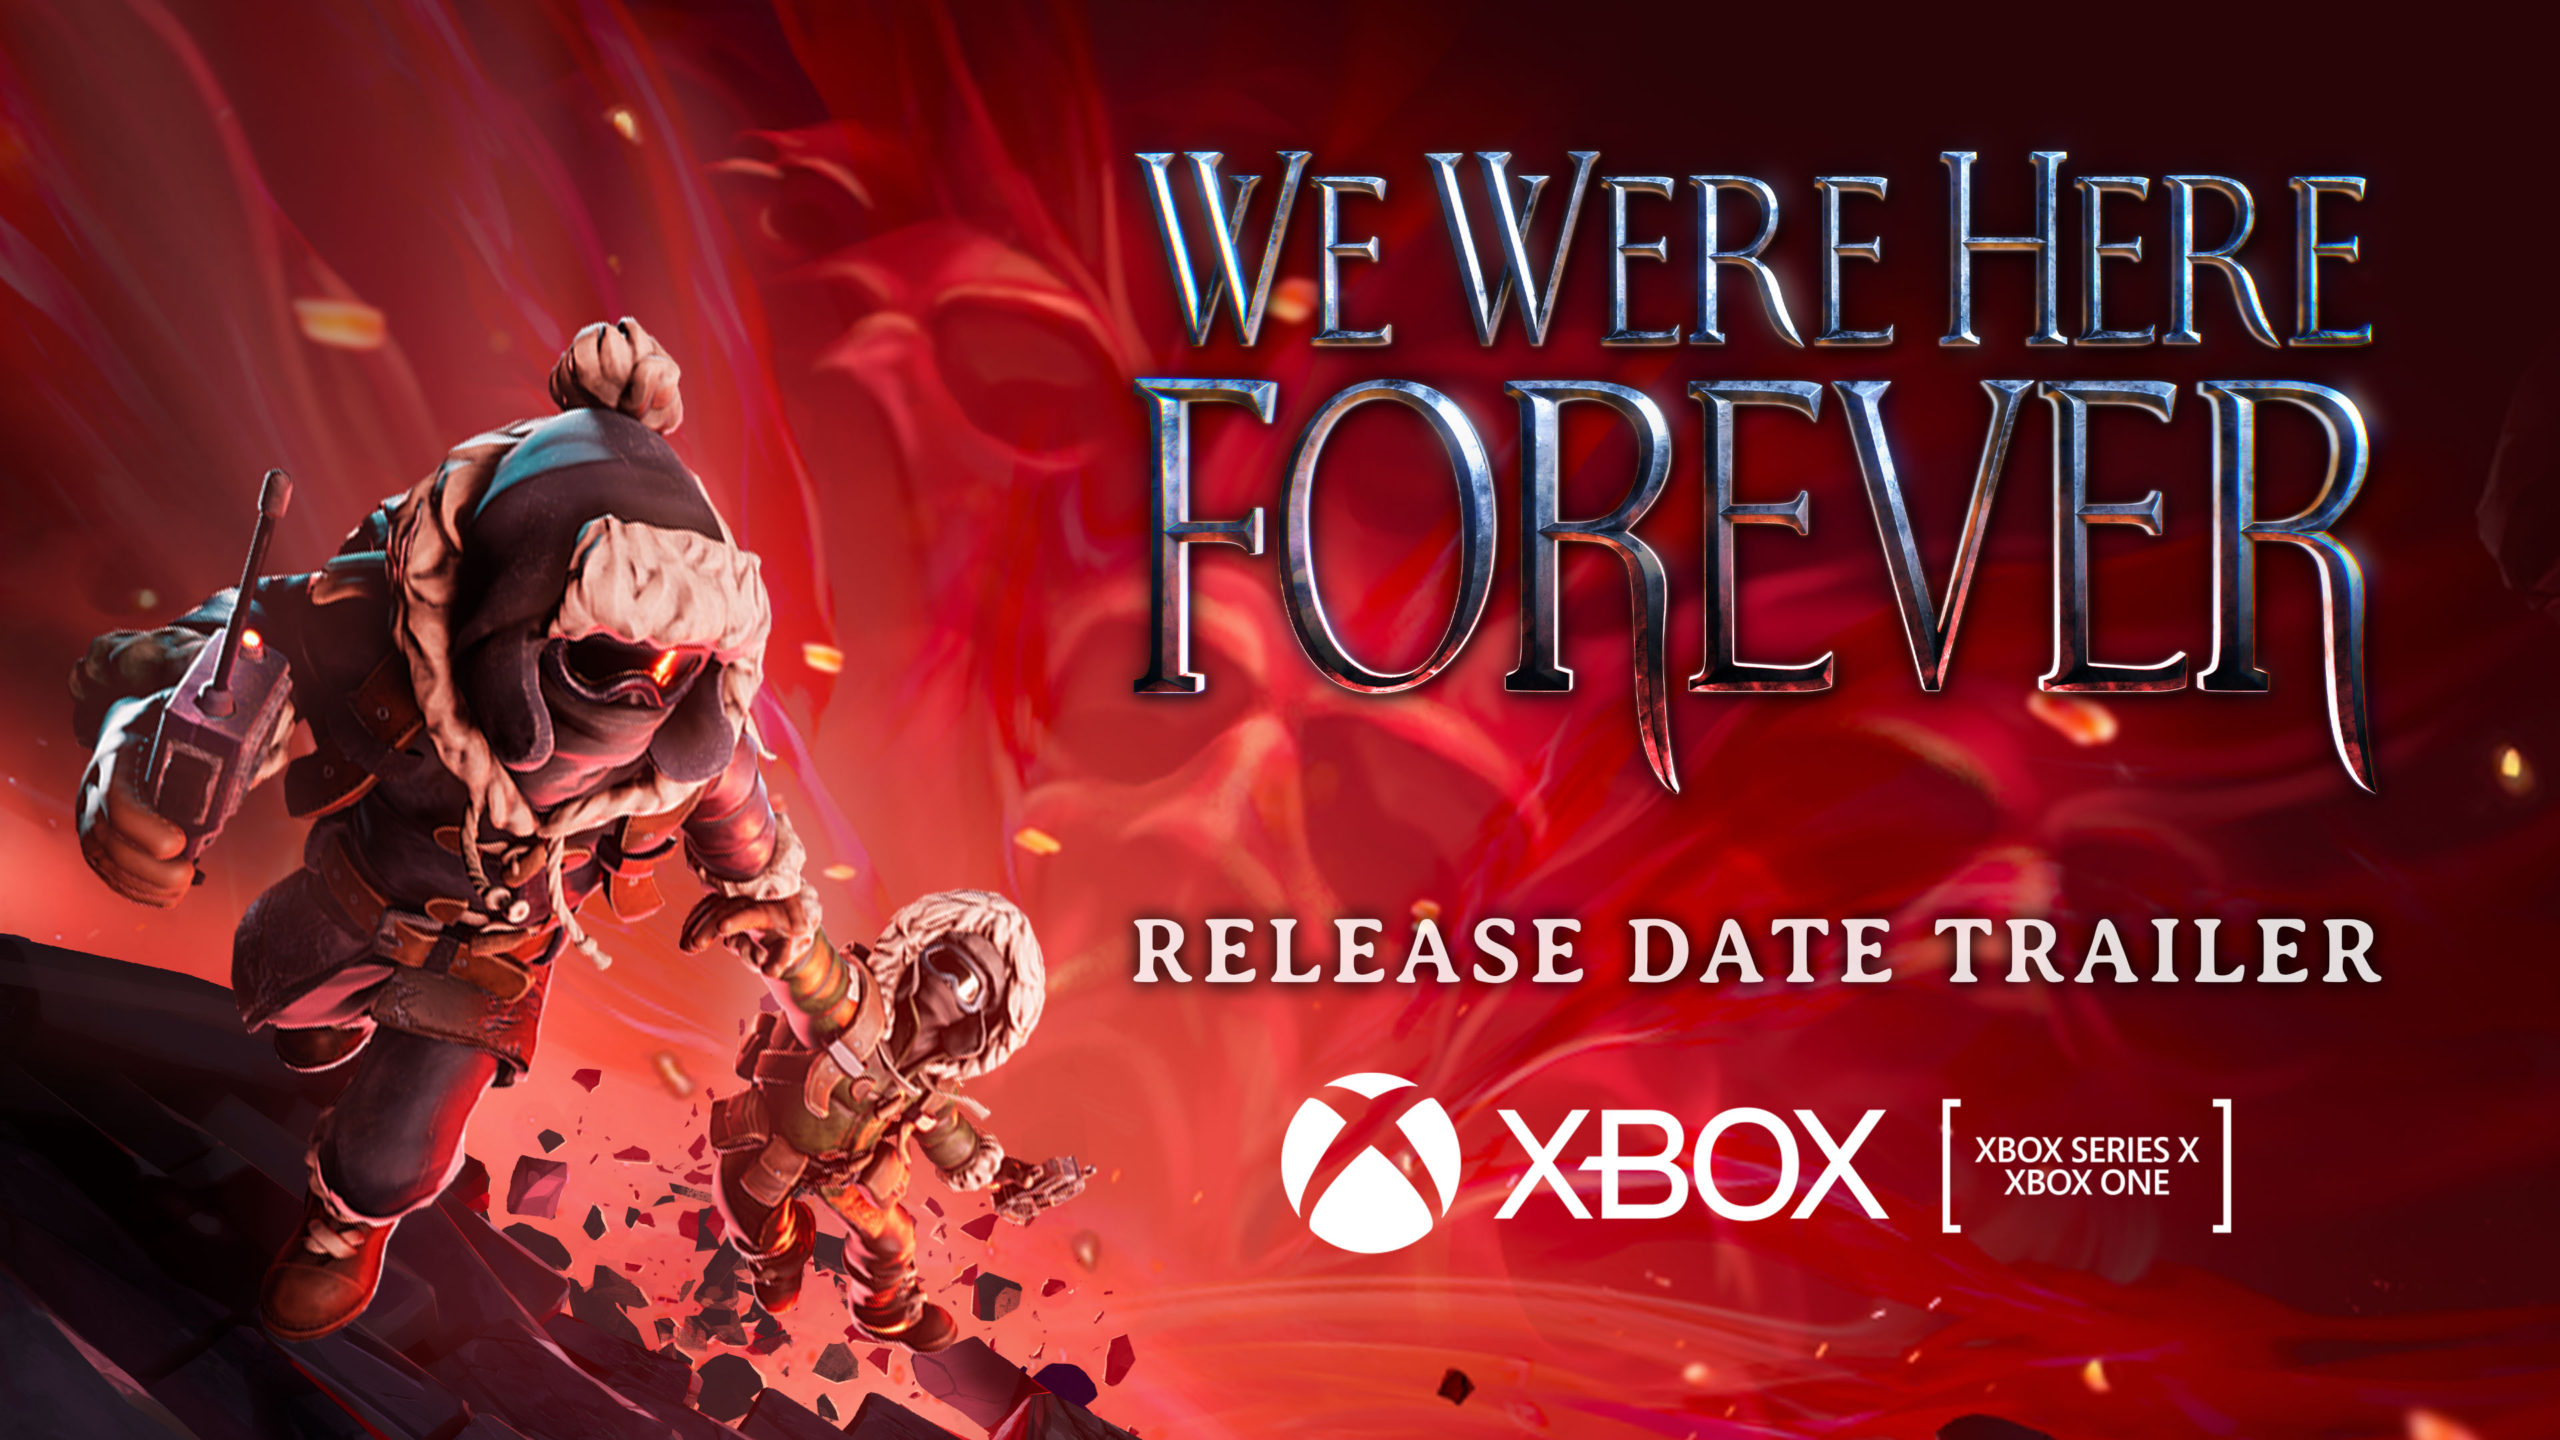 Will You Escape Castle Rock for Good This Time? We Were Here Forever is Releasing on Xbox